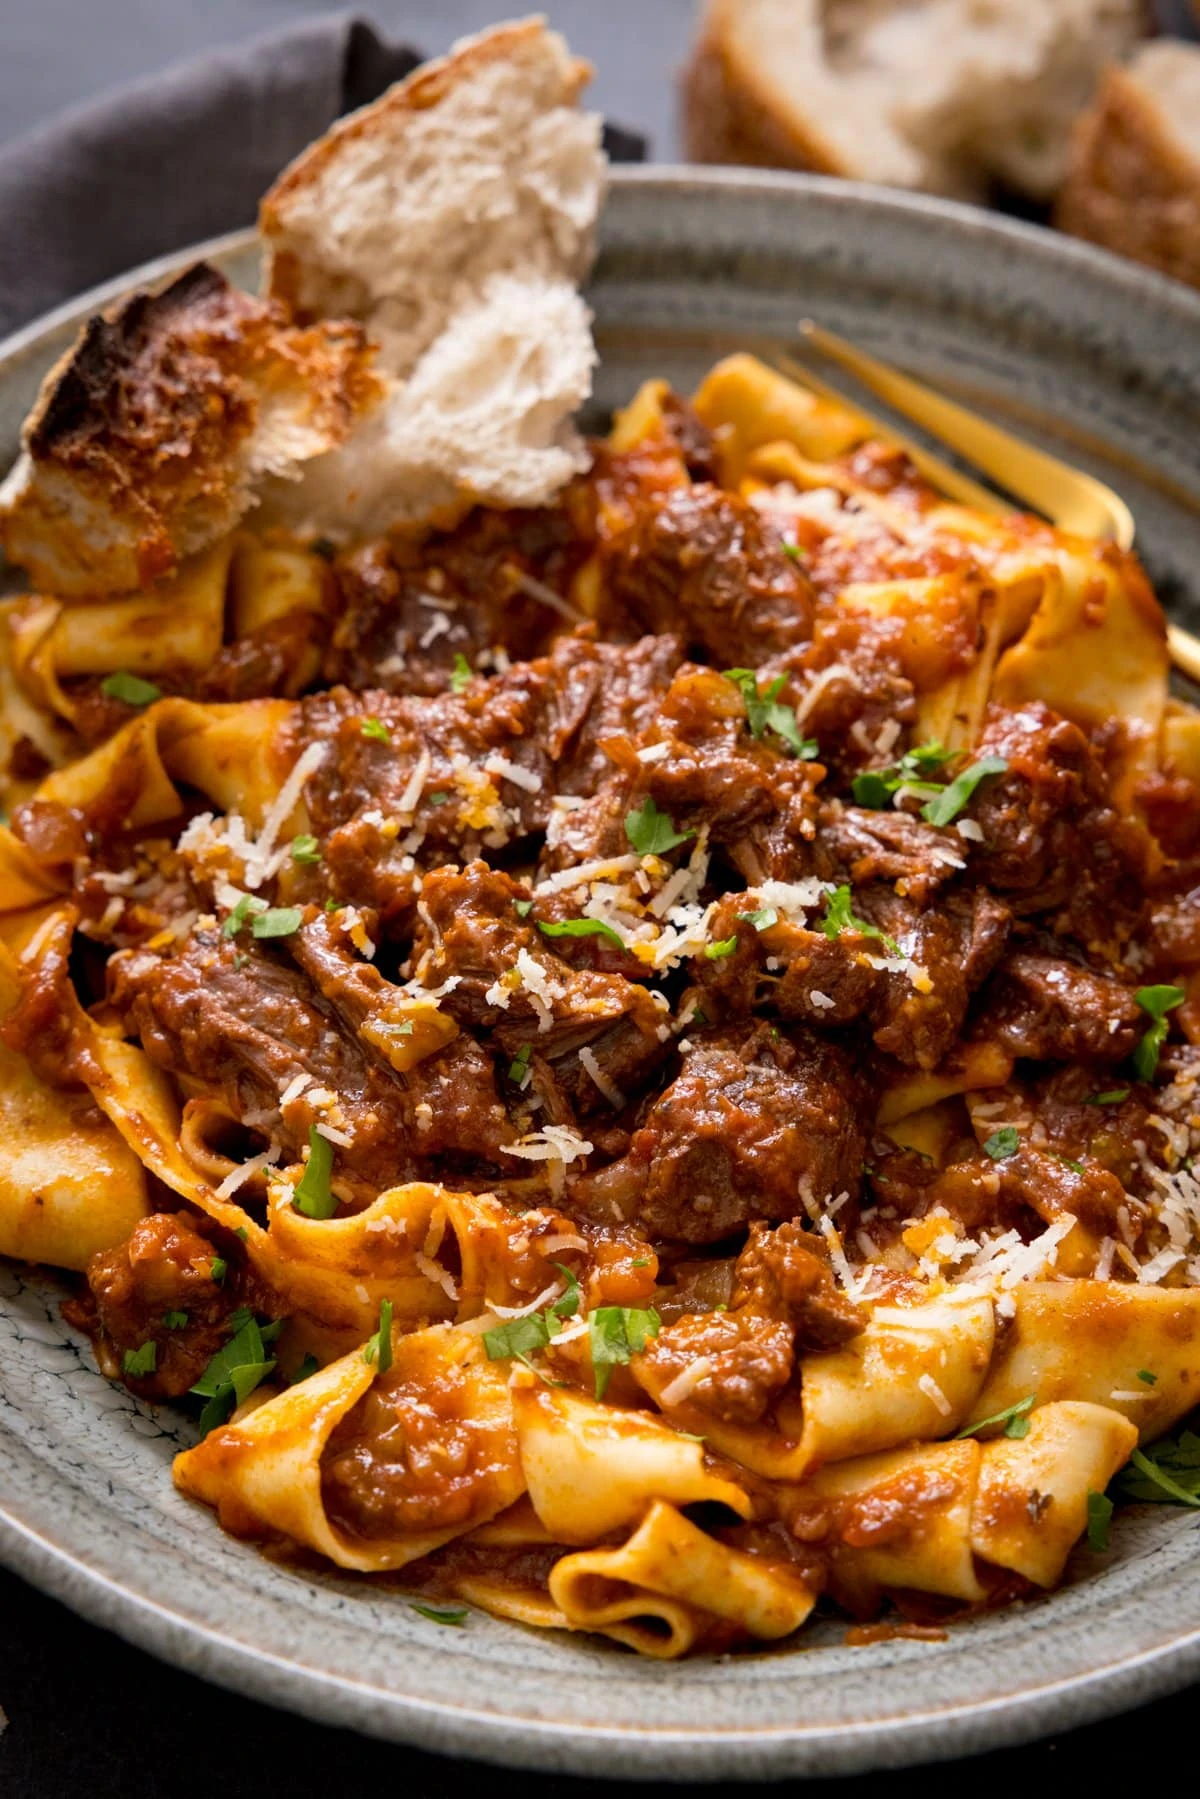 Beef ragu with pappardelle in a bowl with a chunk of bread.